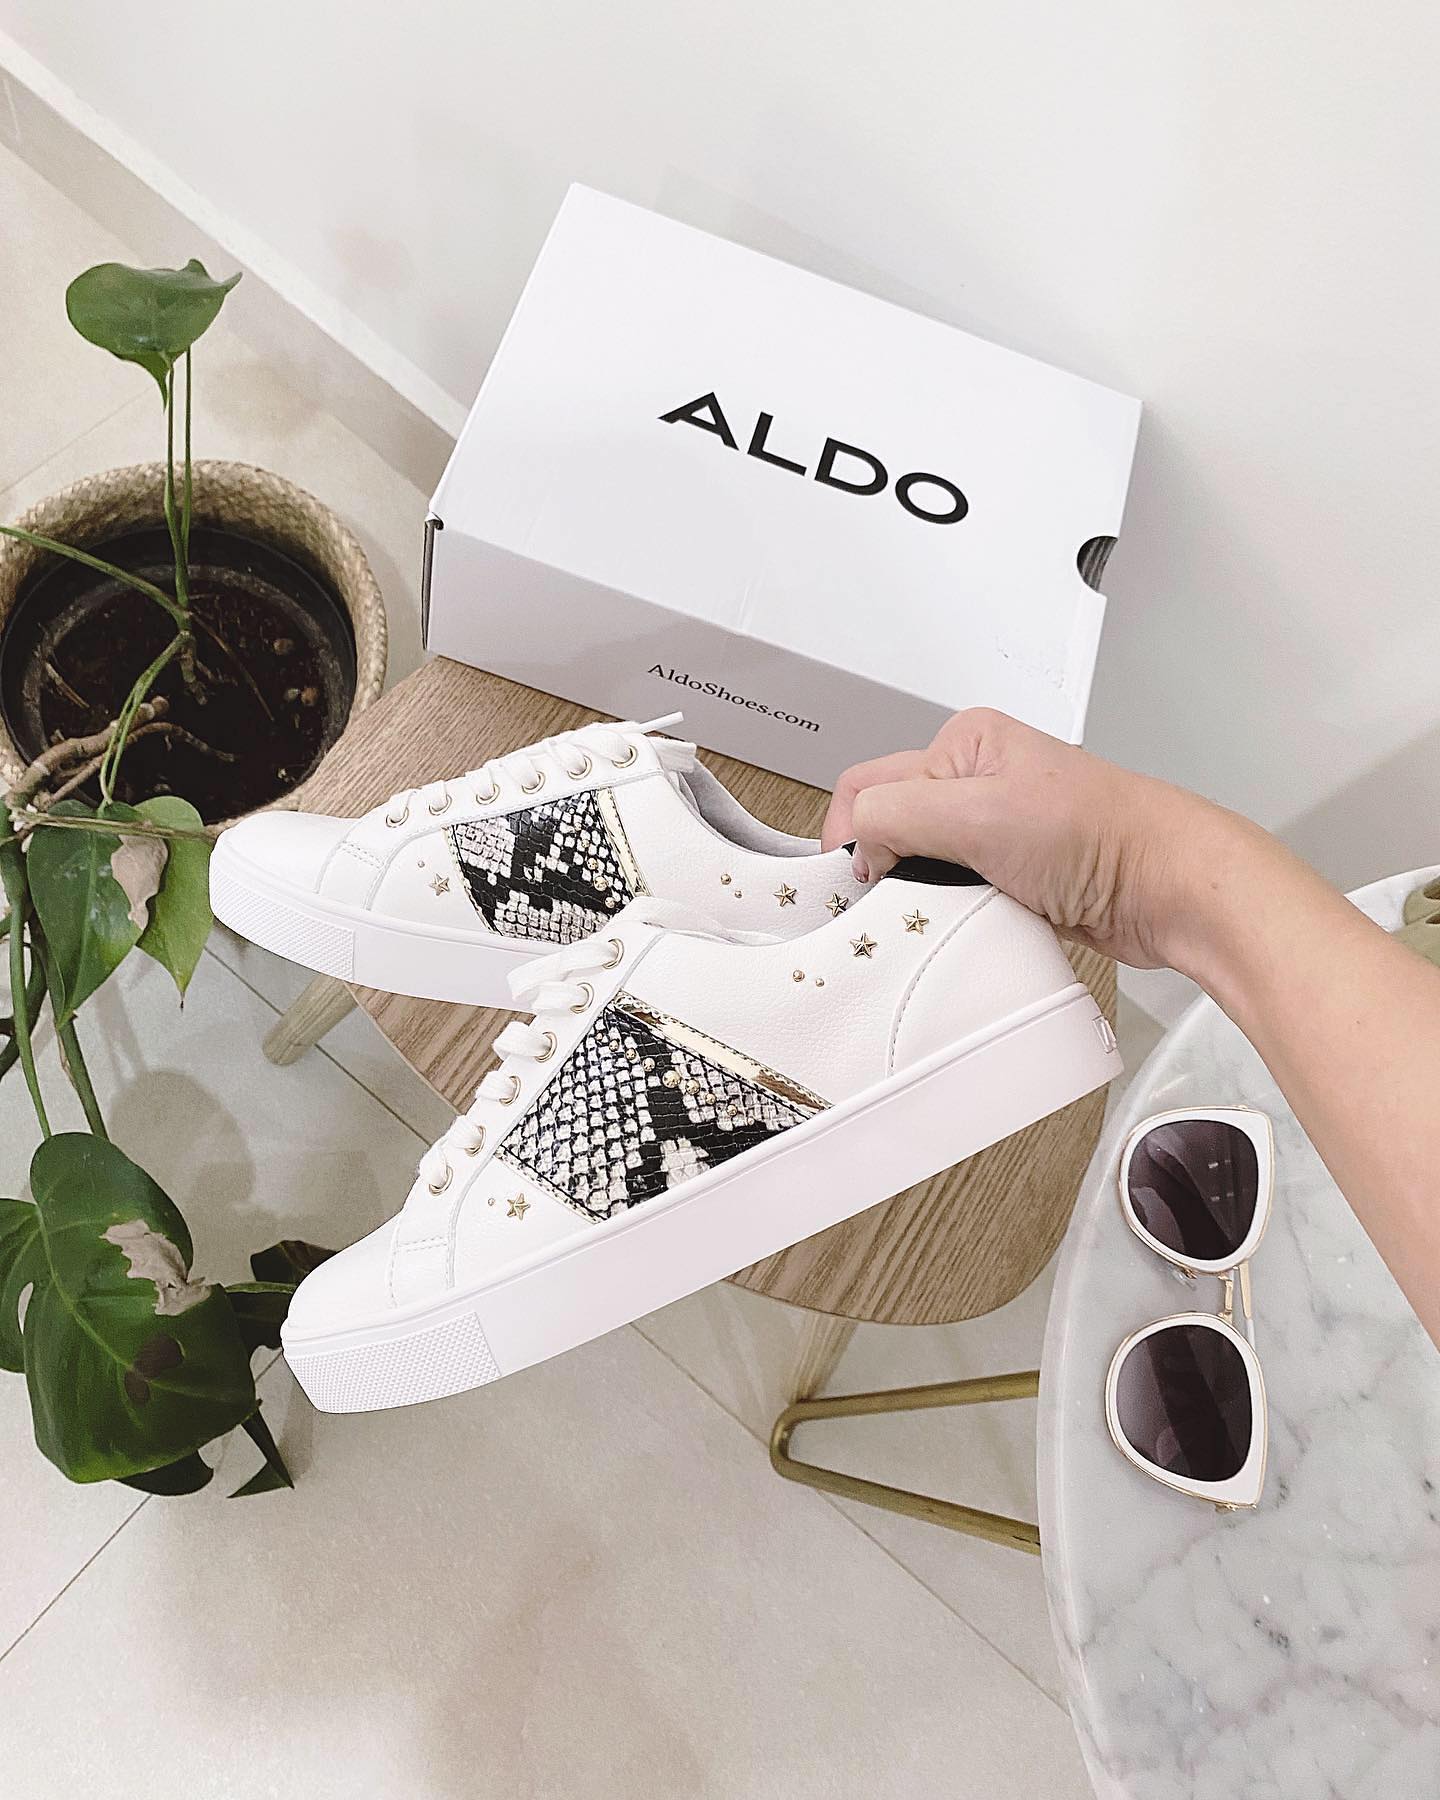 ALDO Shoes on Twitter: for a way to stay comfortable at home? Discover our wear-everywhere https://t.co/H4qsPk3iv1 // via @patty_cascar #AldoShoes / Twitter